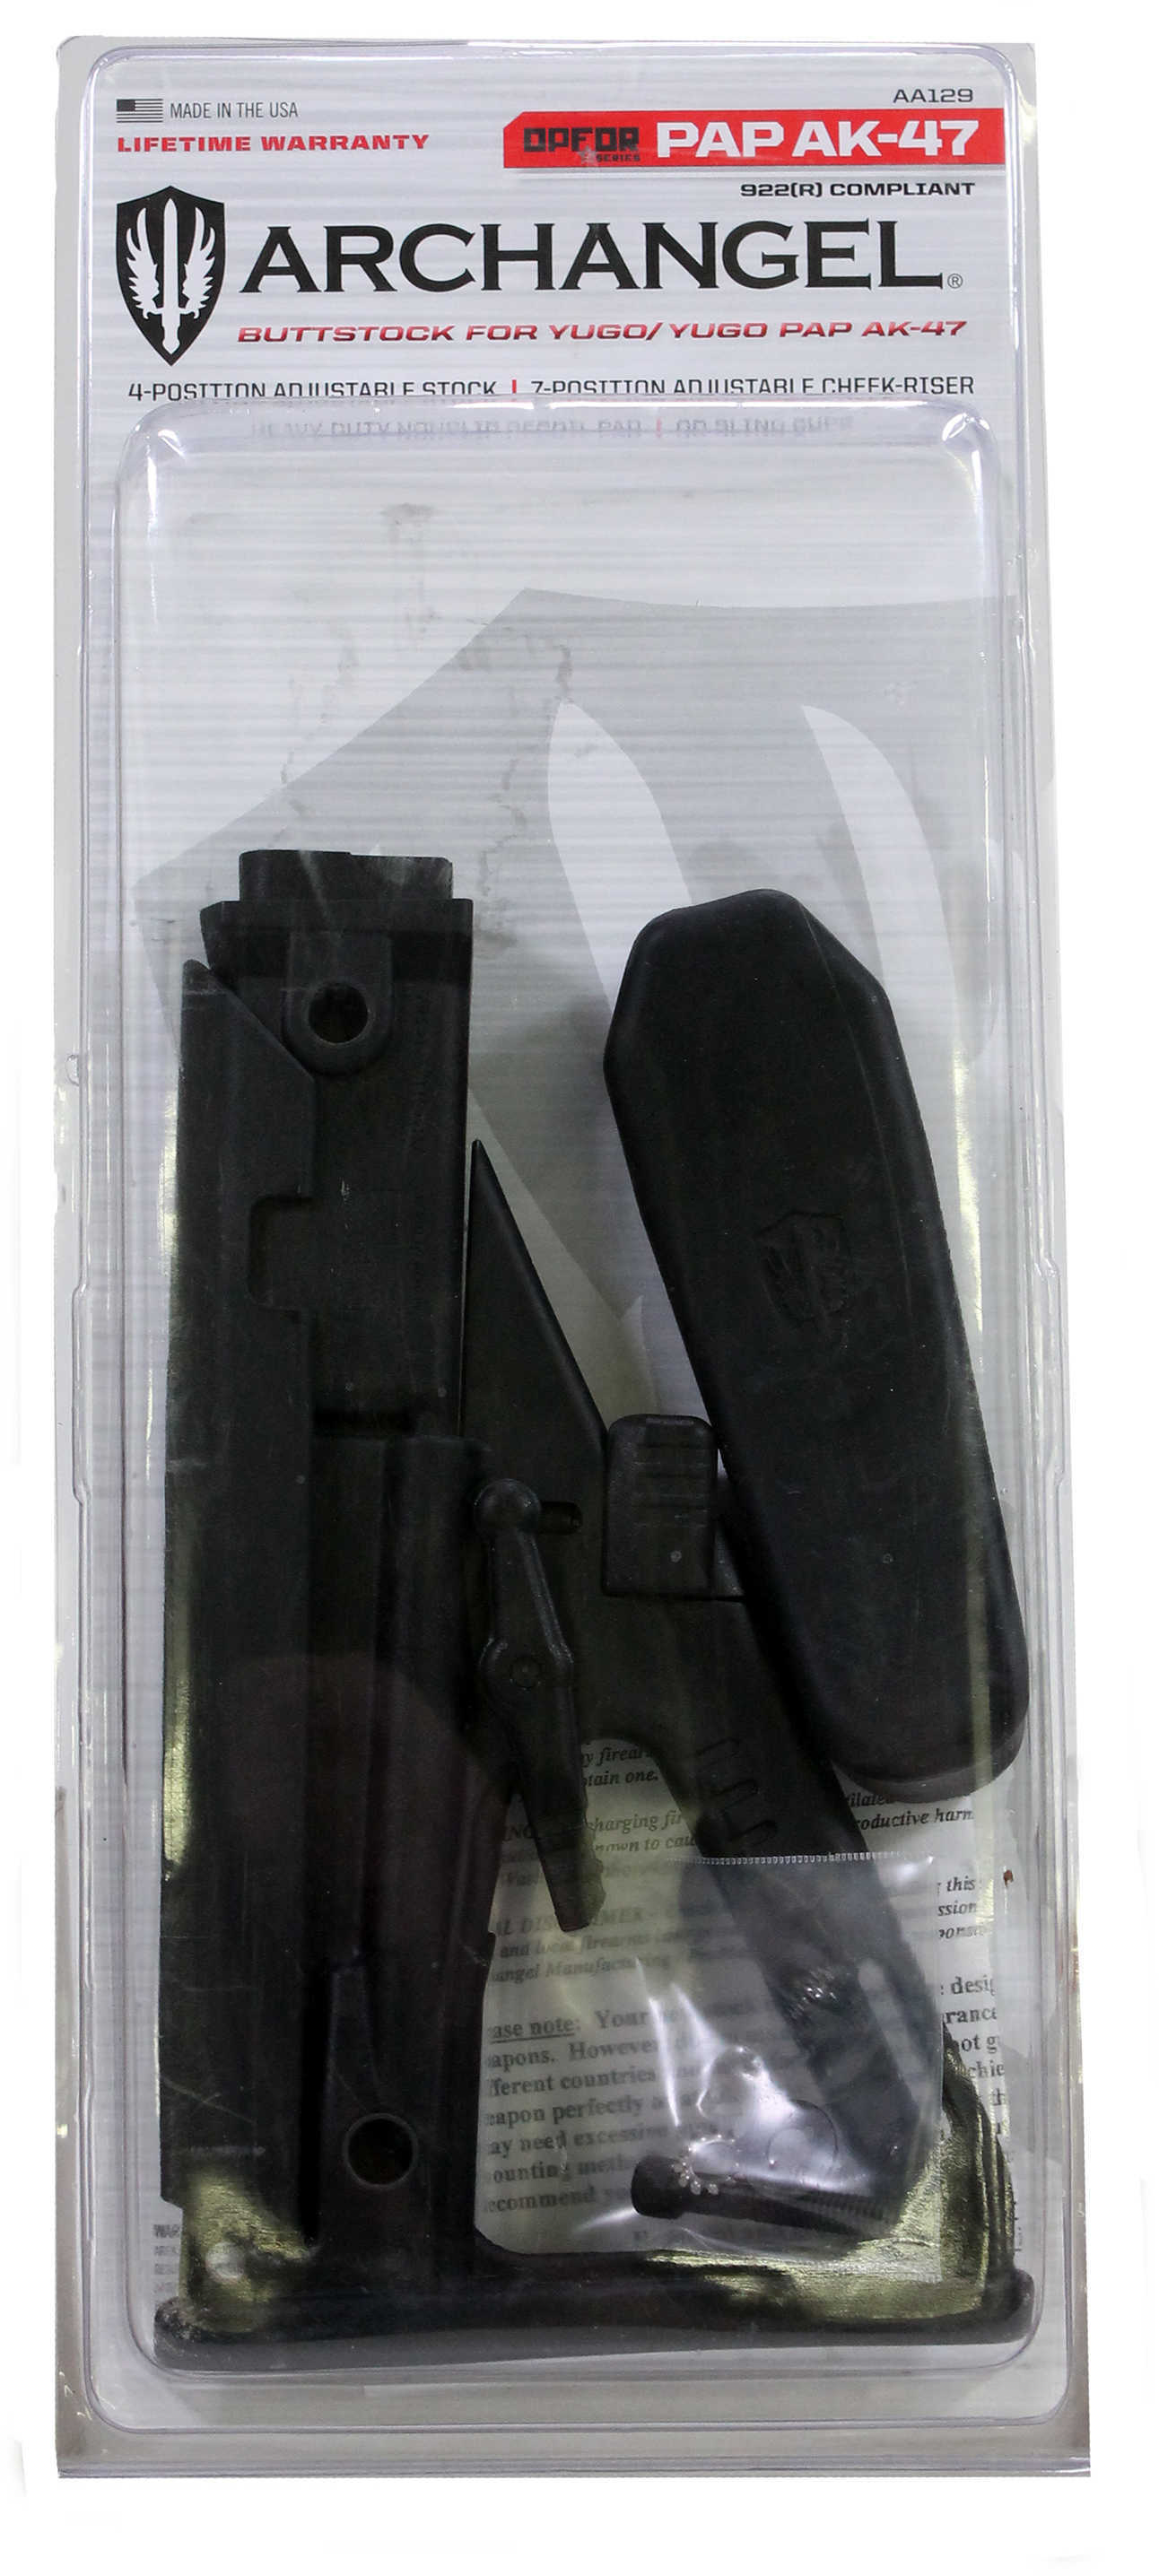 ProMag Archangel Yugo Pap AK-Series Op For Buttstock, Black Polymer Md: AA129